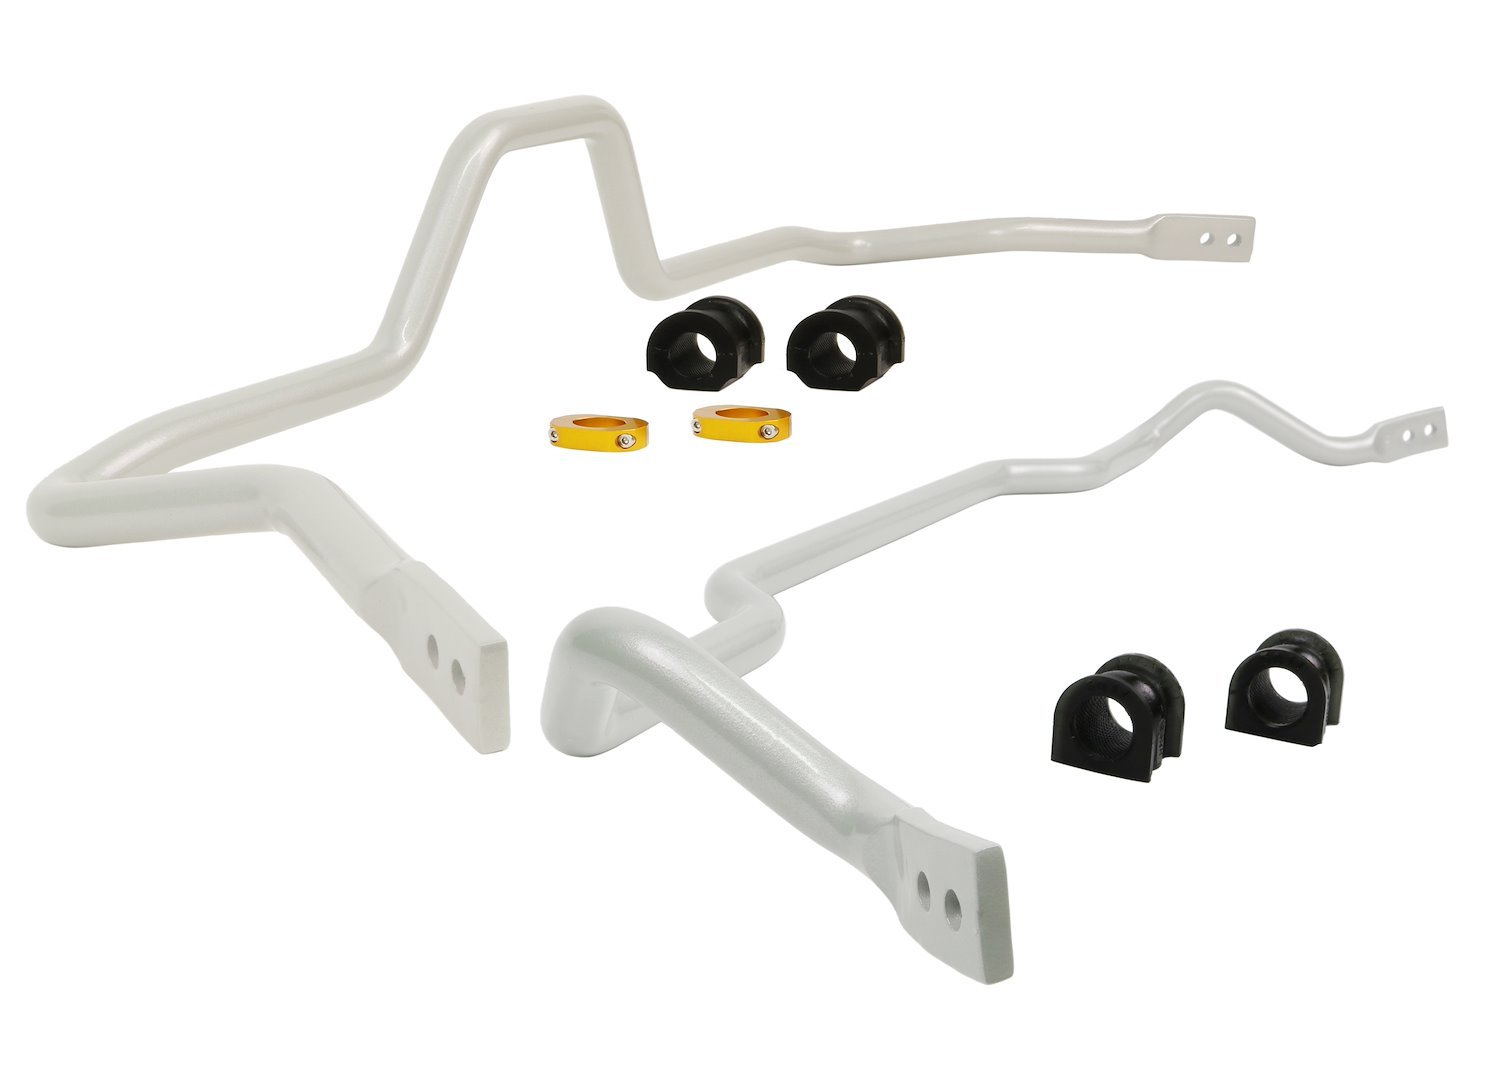 BHK001 Front and Rear Sway Bar Kit for 2001-2006 Acura RSX DC5 Type R, Type S